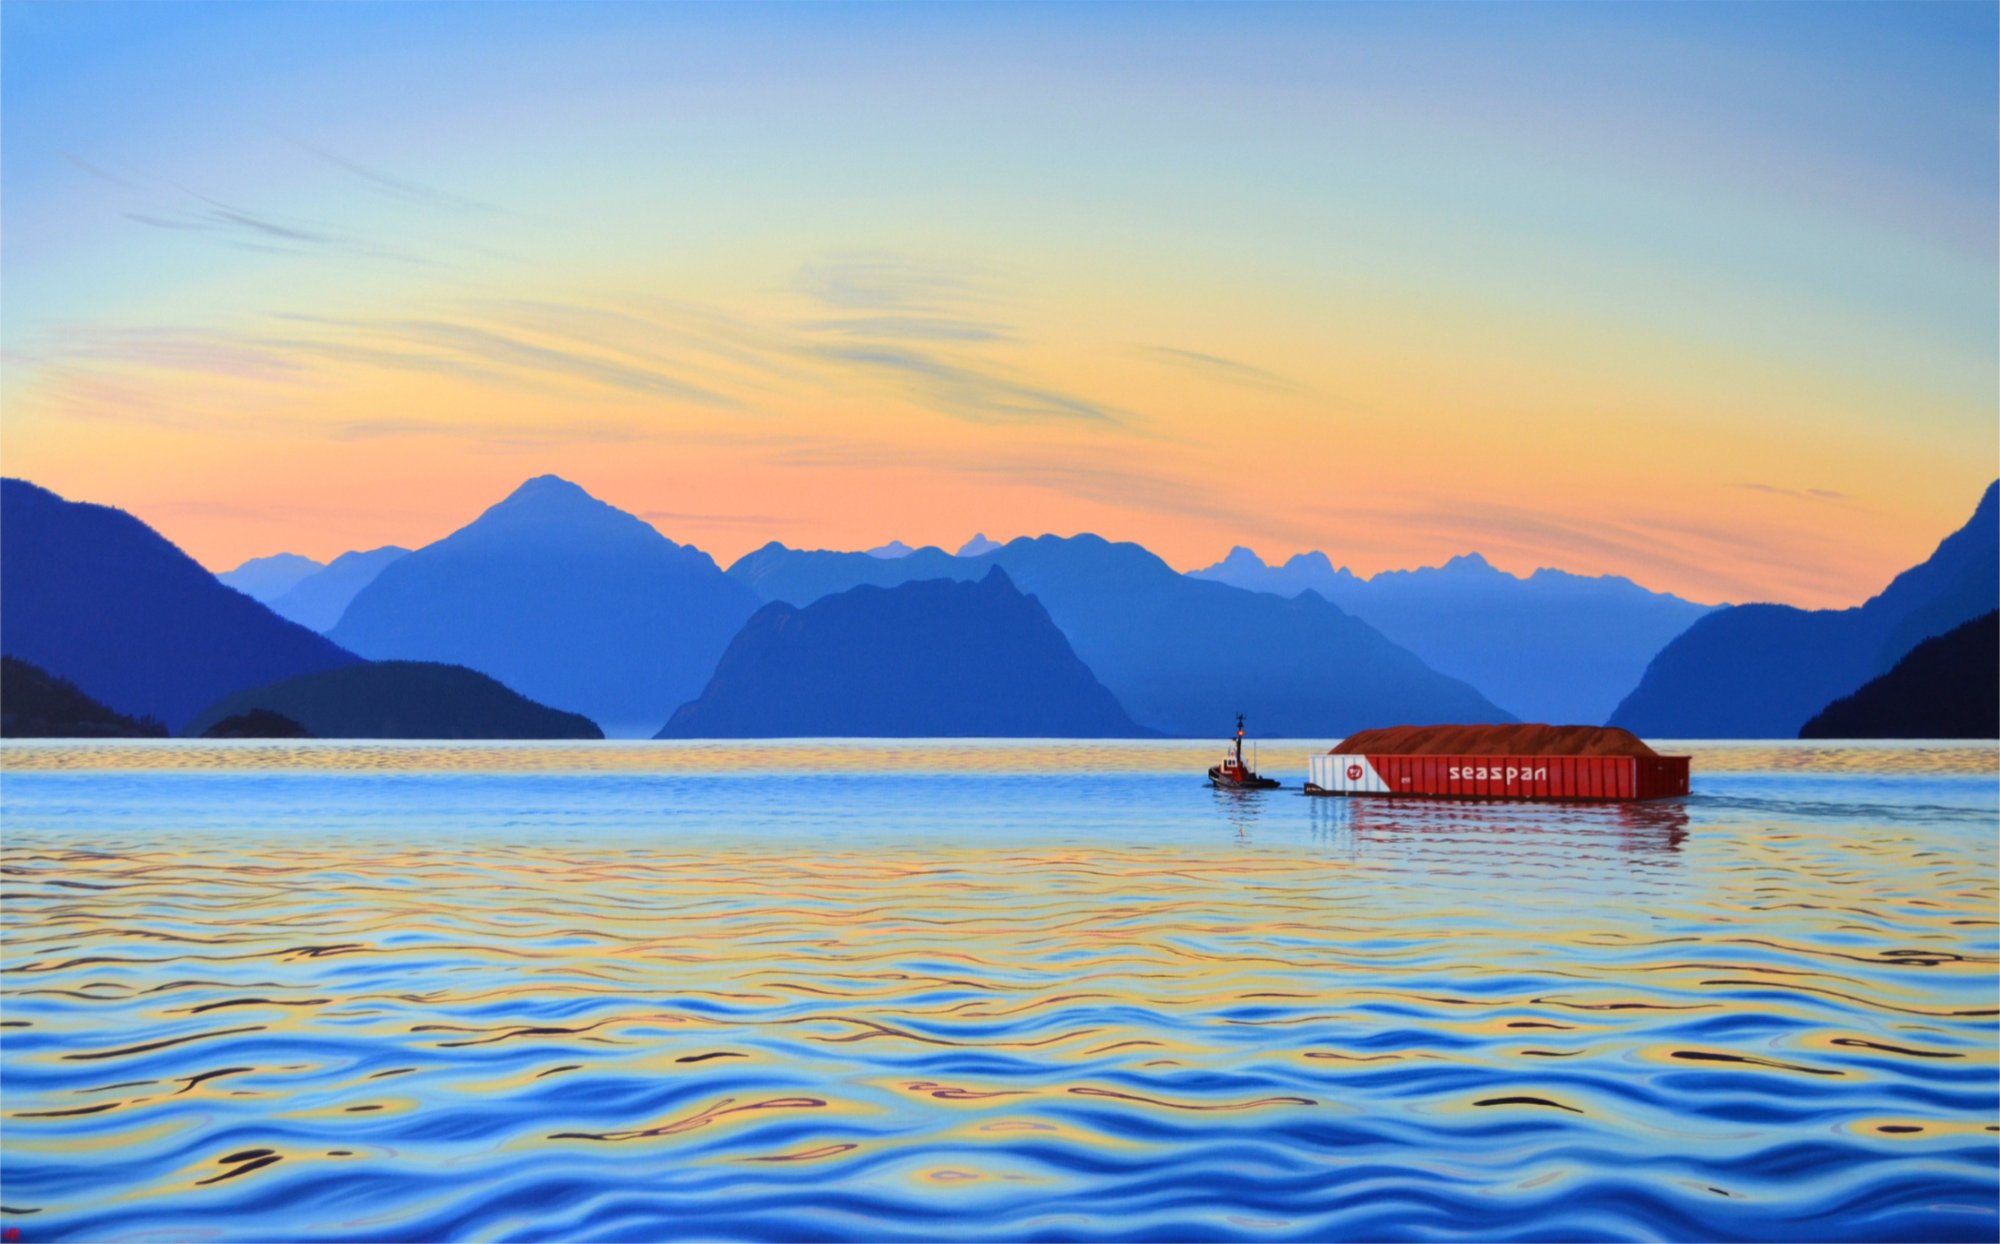   Commission - Howe Sound    30 x 48    acrylic on canvas  